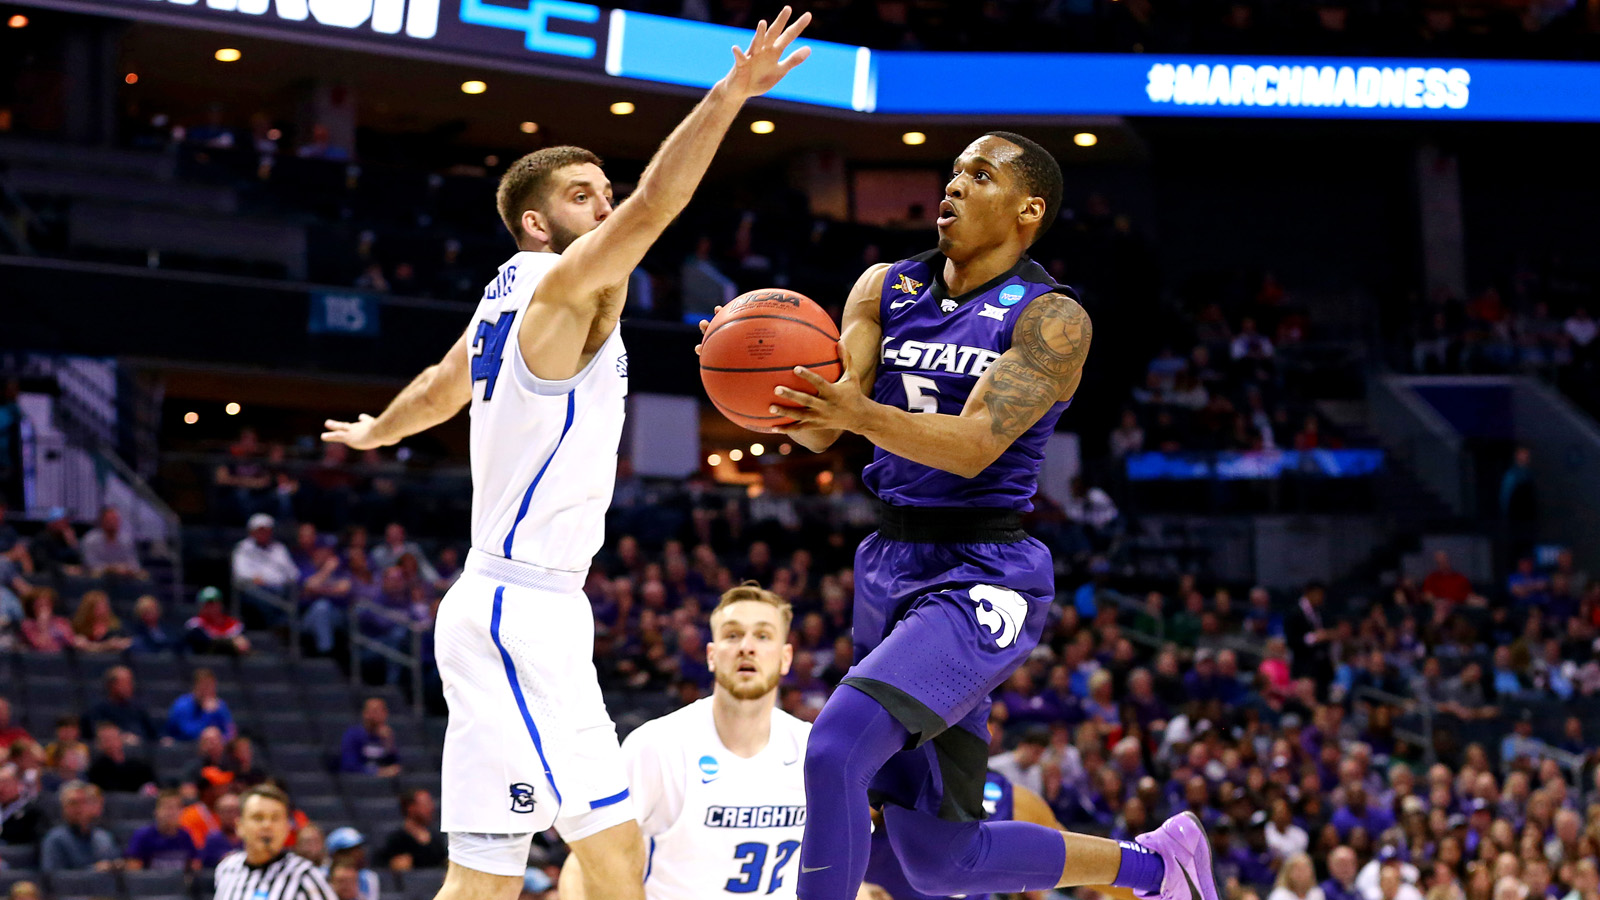 K-State trudges on without Wade, defeats Creighton 69-59